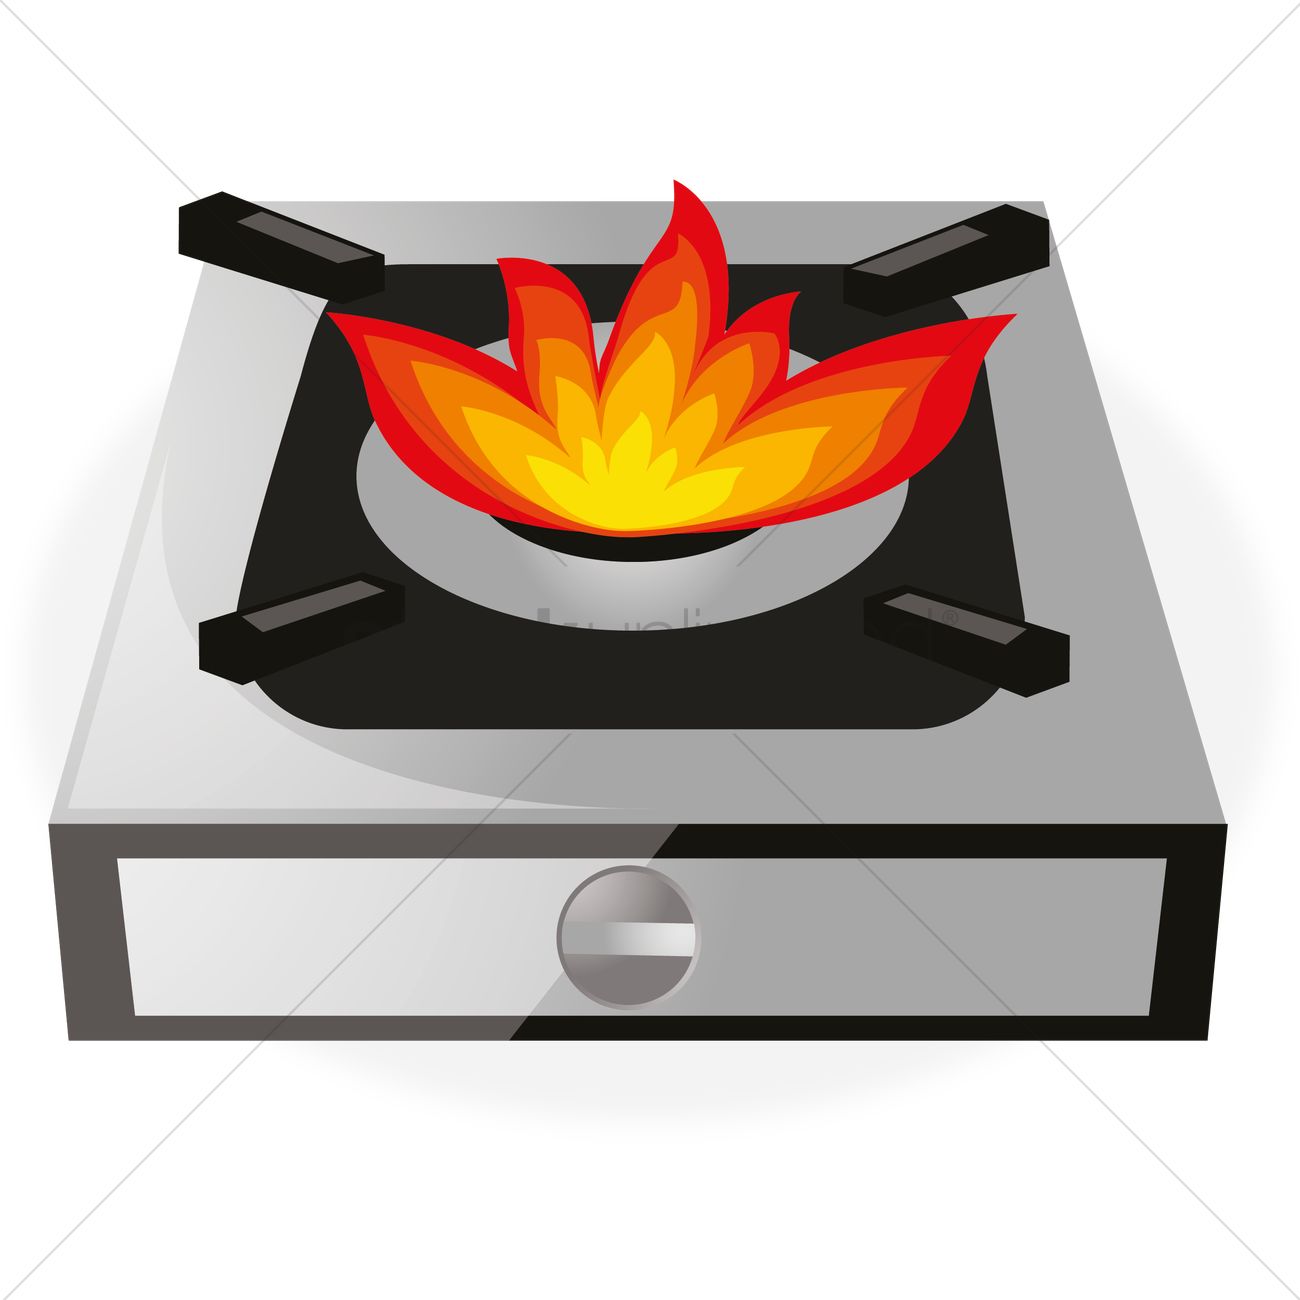 Stove Png Cartoon : Free Commercial Stove Cliparts, Download Free Clip